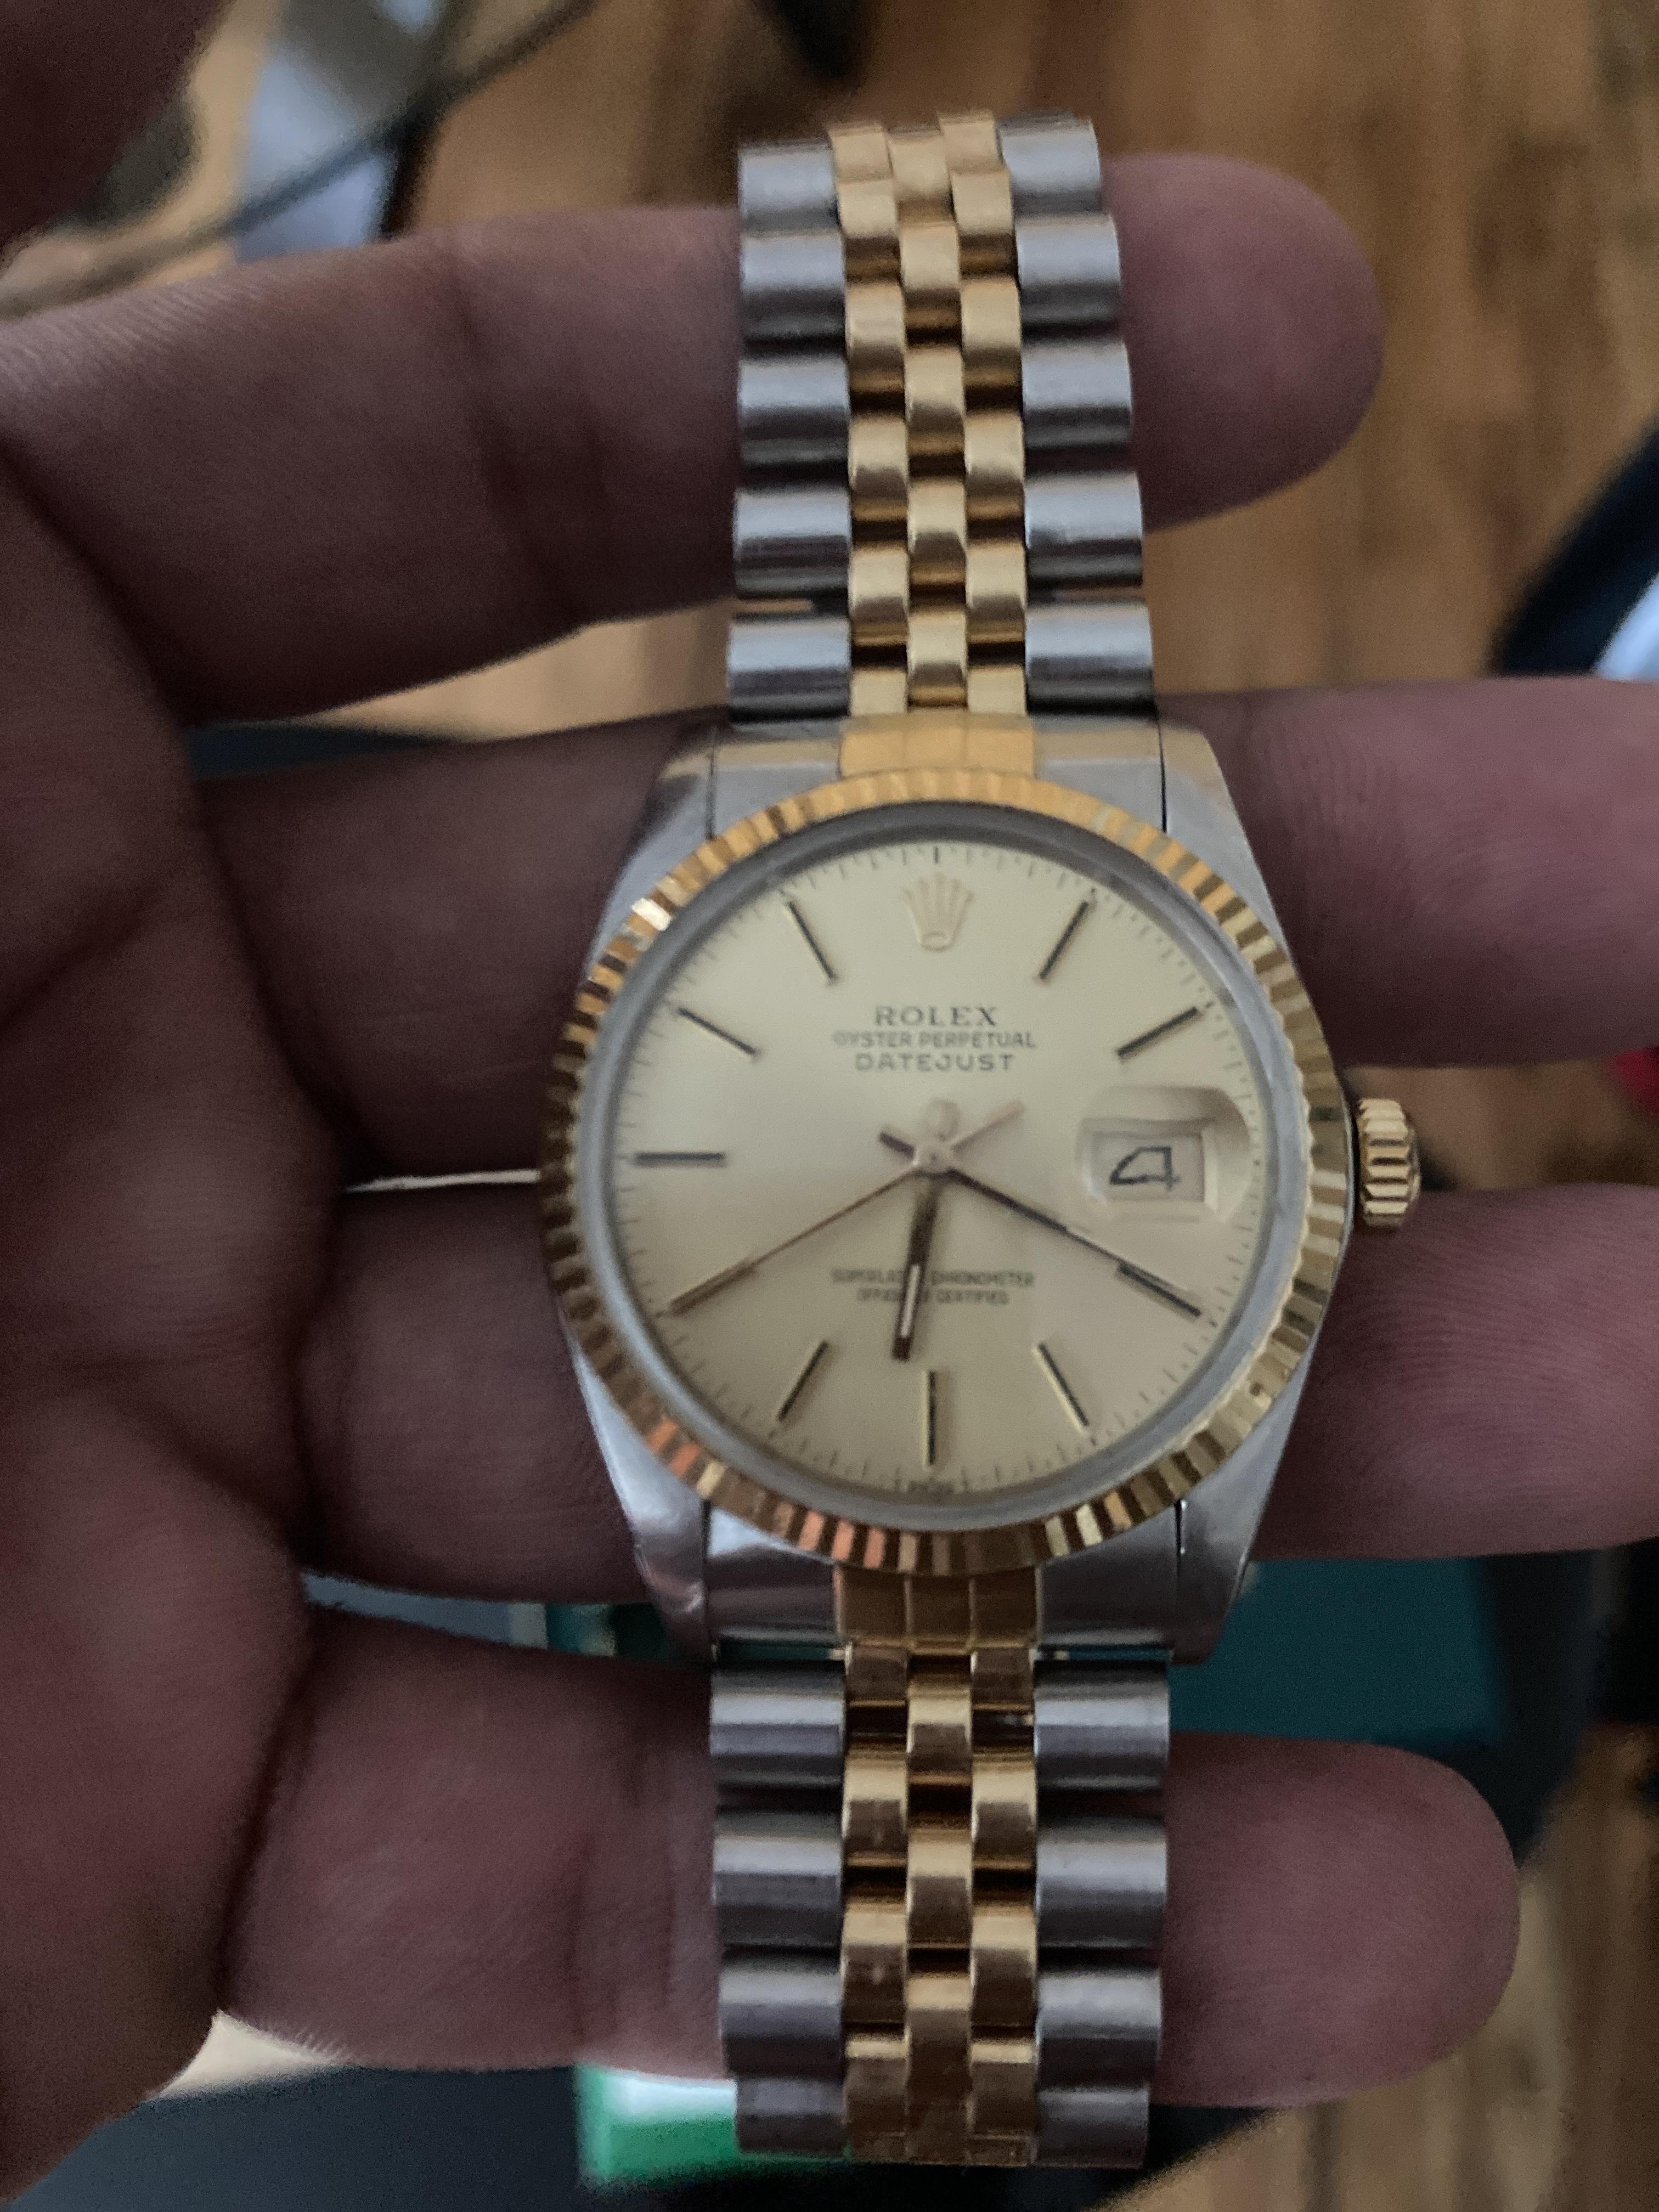 My datejust stopped working - Introduce Yourself Here - Watch Repair Talk